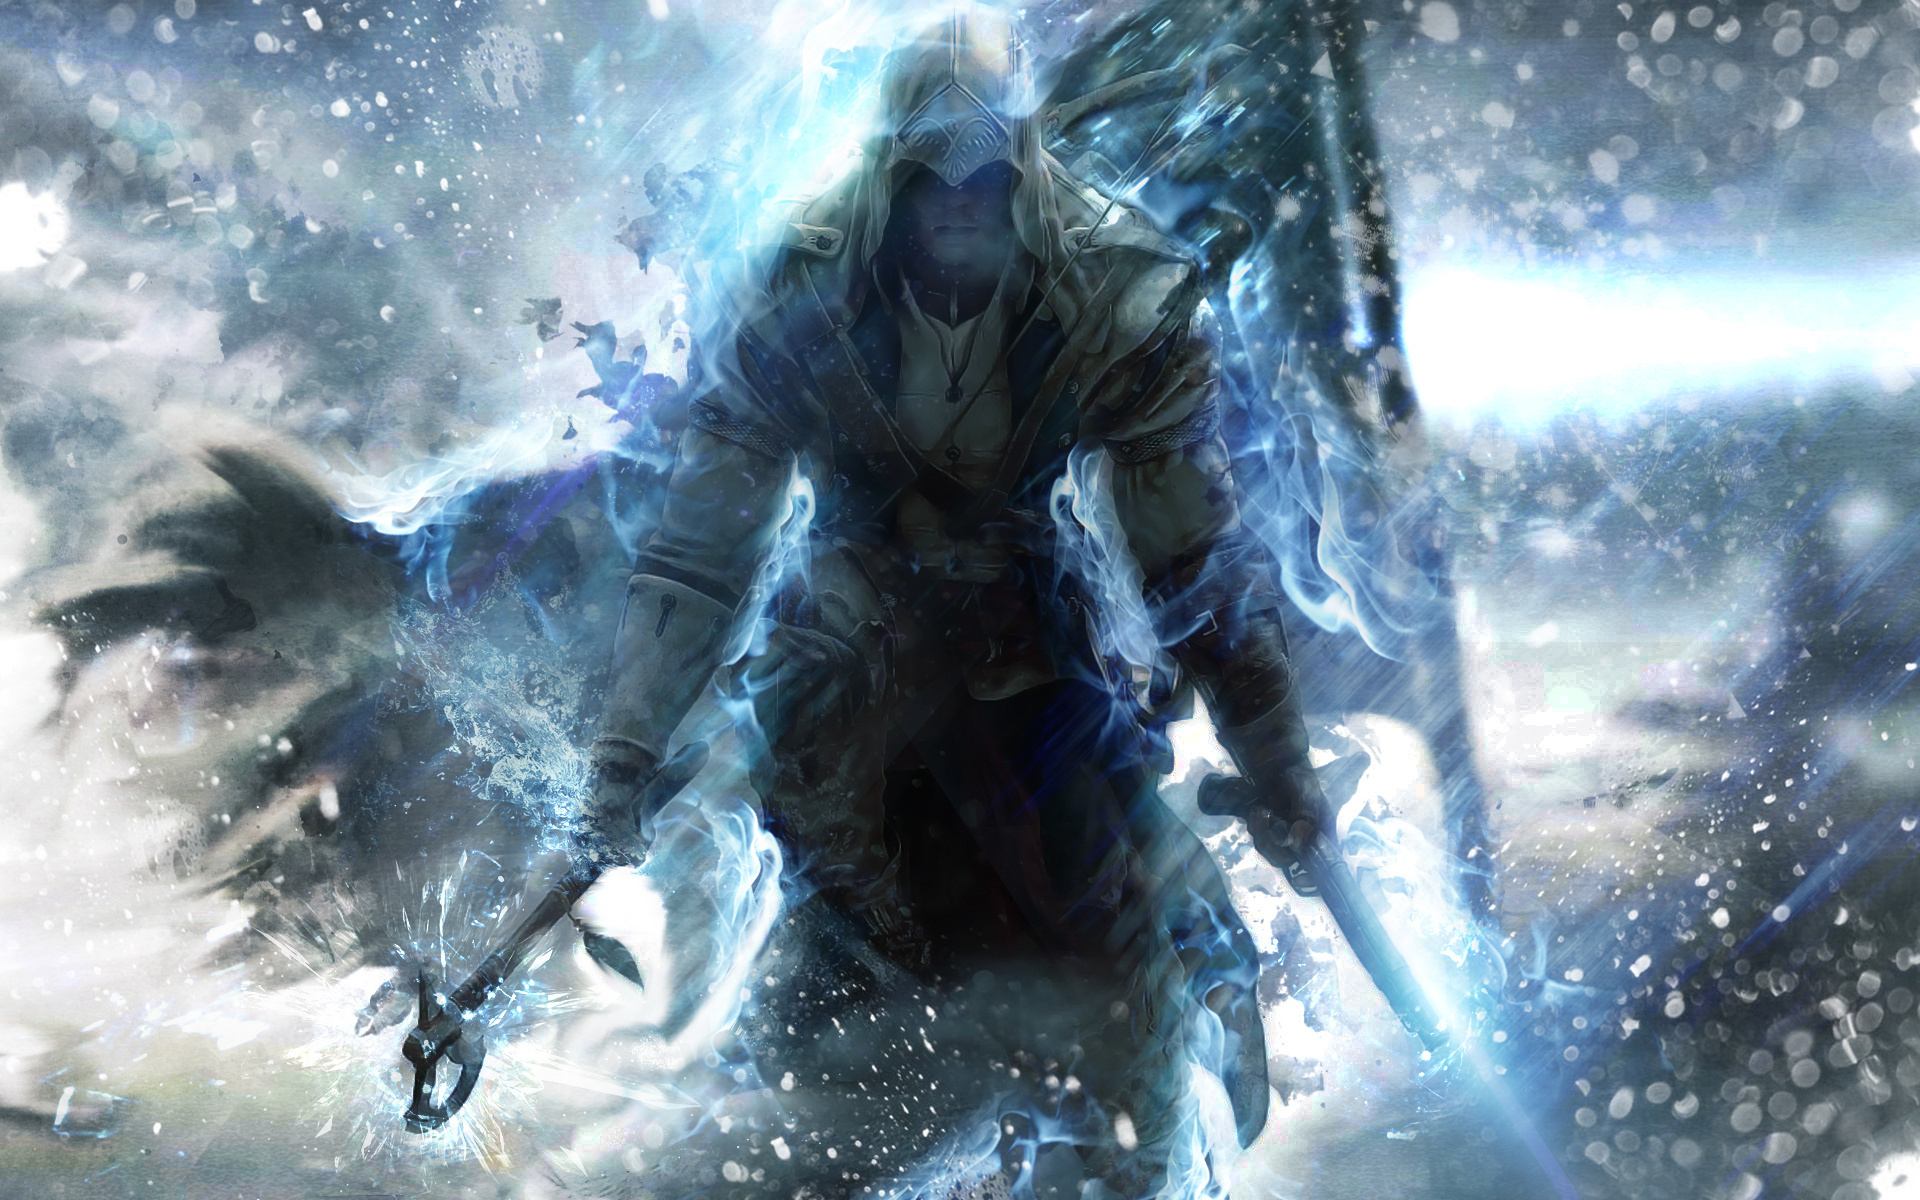 Video Game Assassin's Creed III HD Wallpaper | Background Image